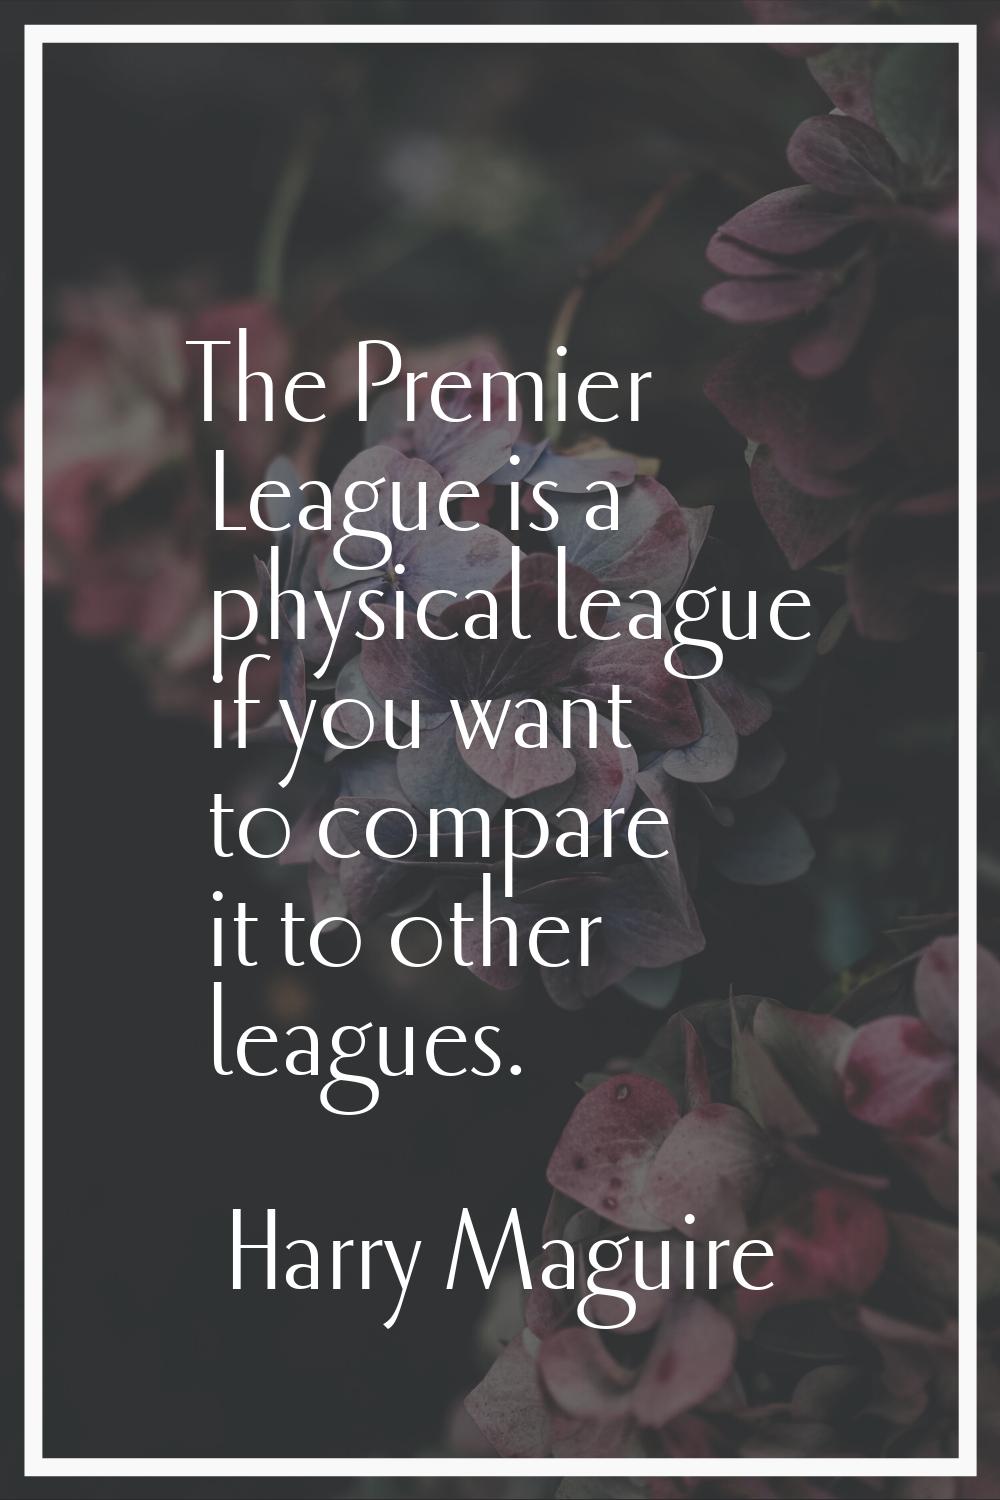 The Premier League is a physical league if you want to compare it to other leagues.